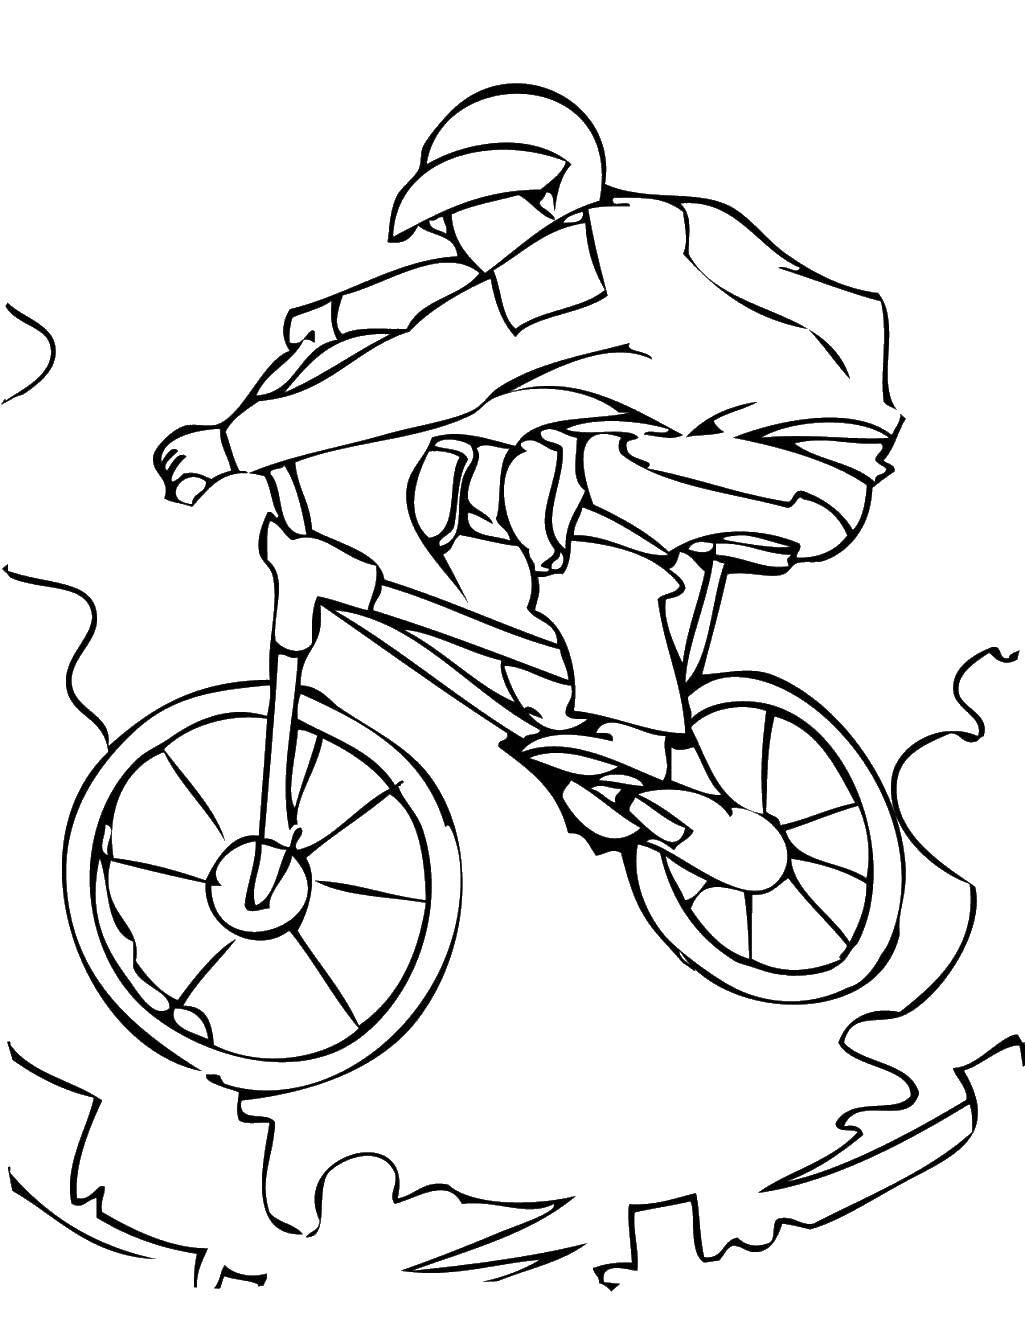 Coloring Cyclist. Category Sports. Tags:  sports, cyclist, Bicycle.